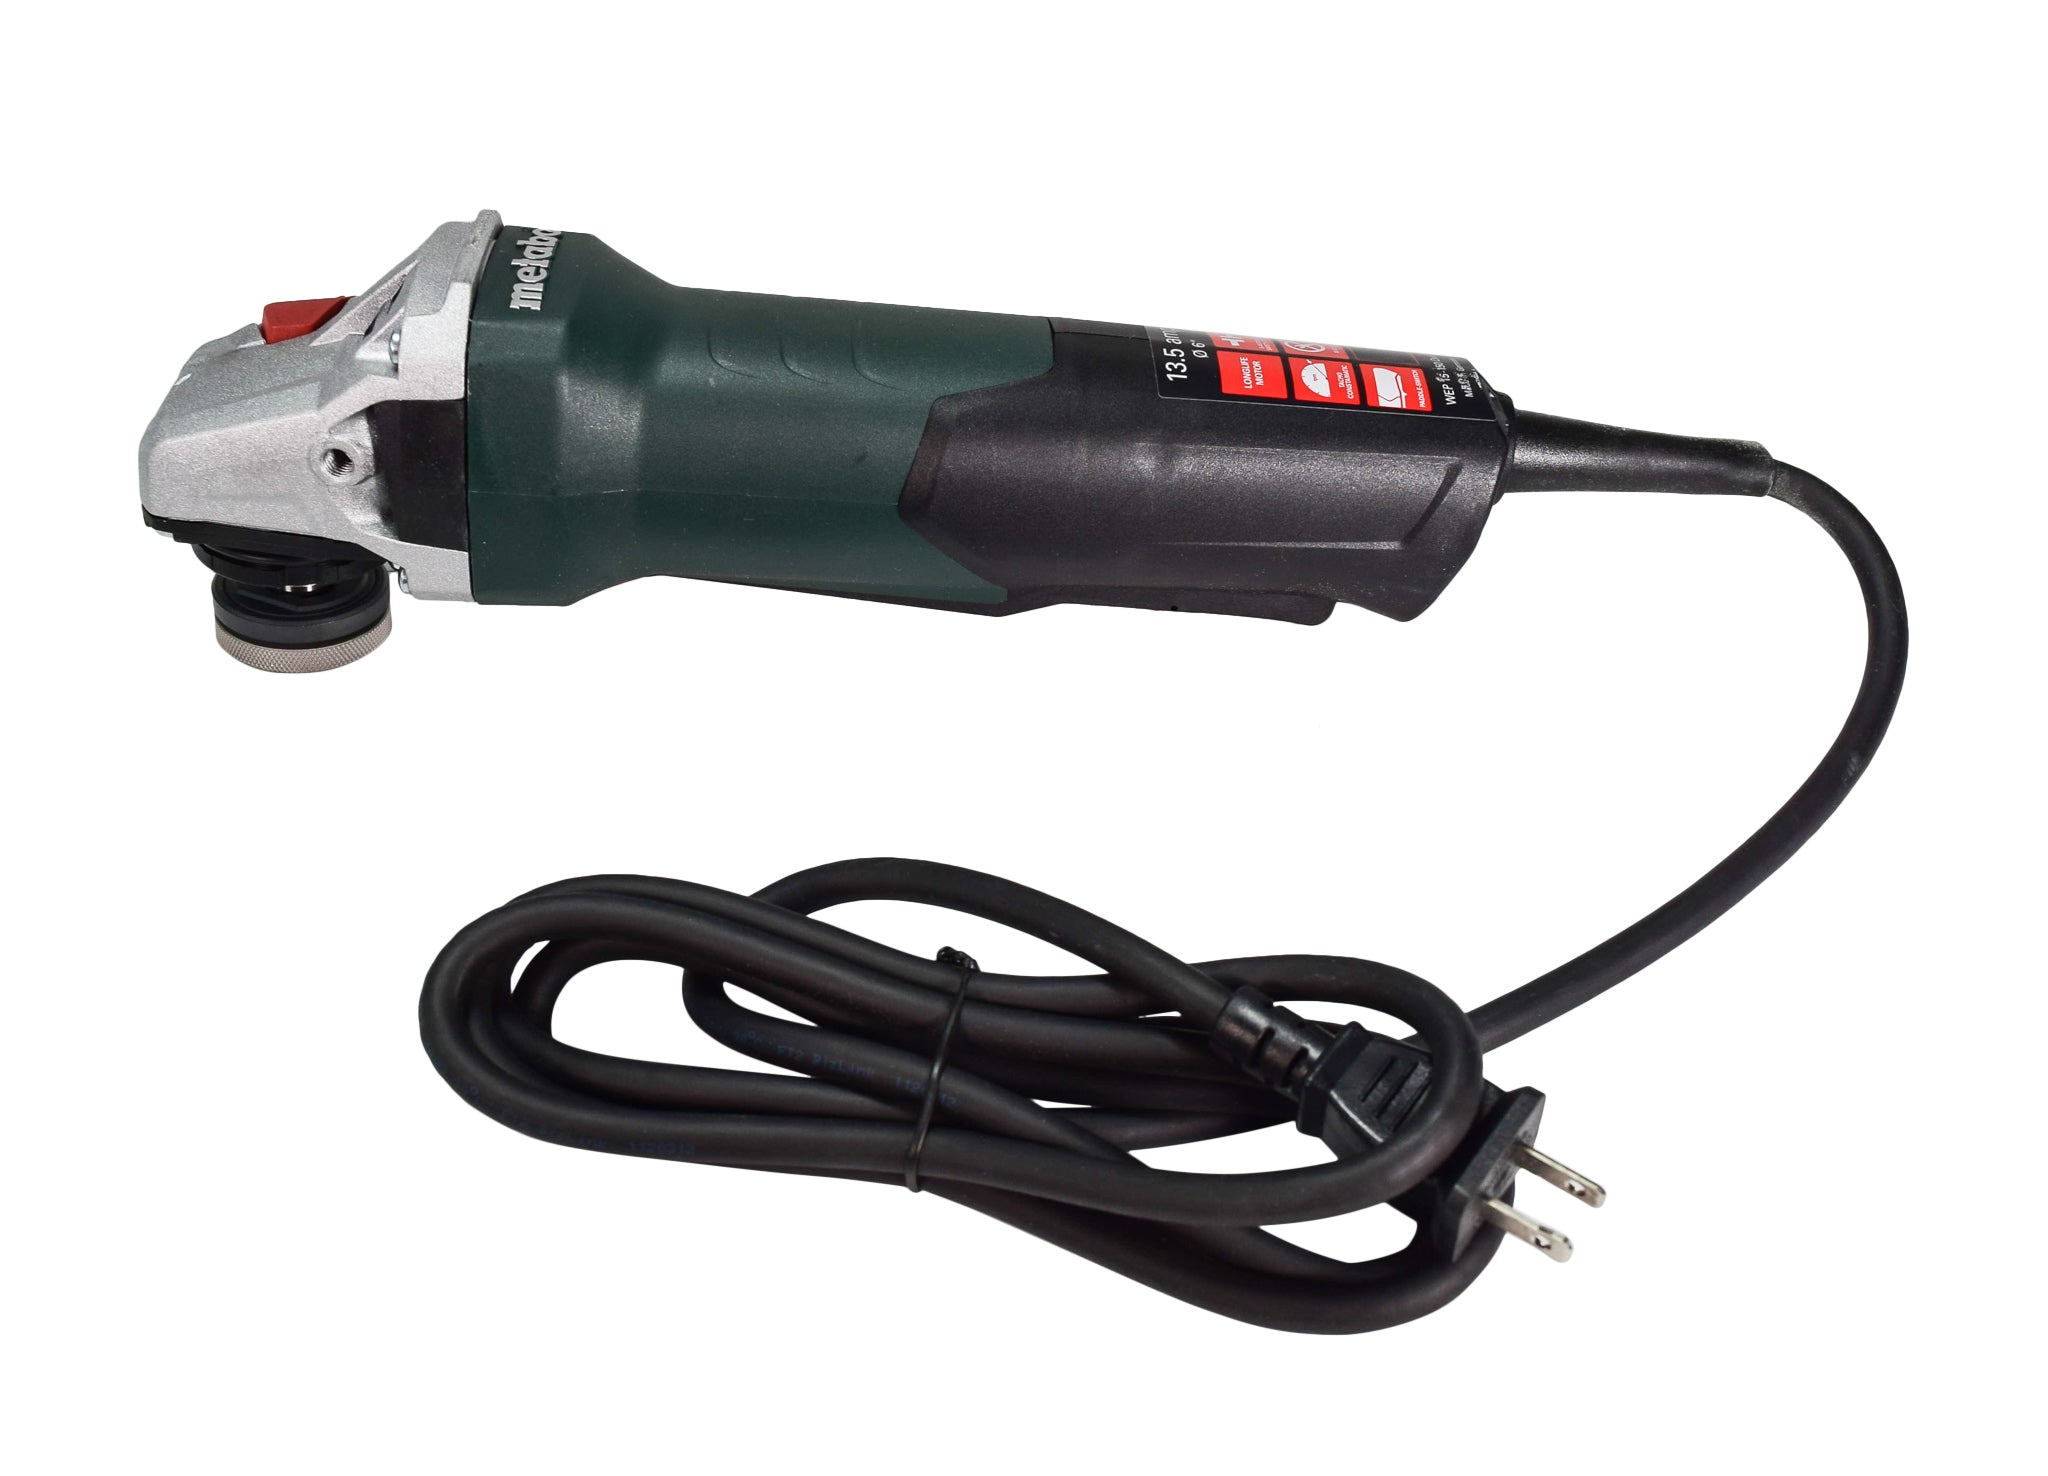 Metabo 600488420 WEP 15-150 Quick 6" Corded Angle Grinder 9,600 RPM 13.5 AMP